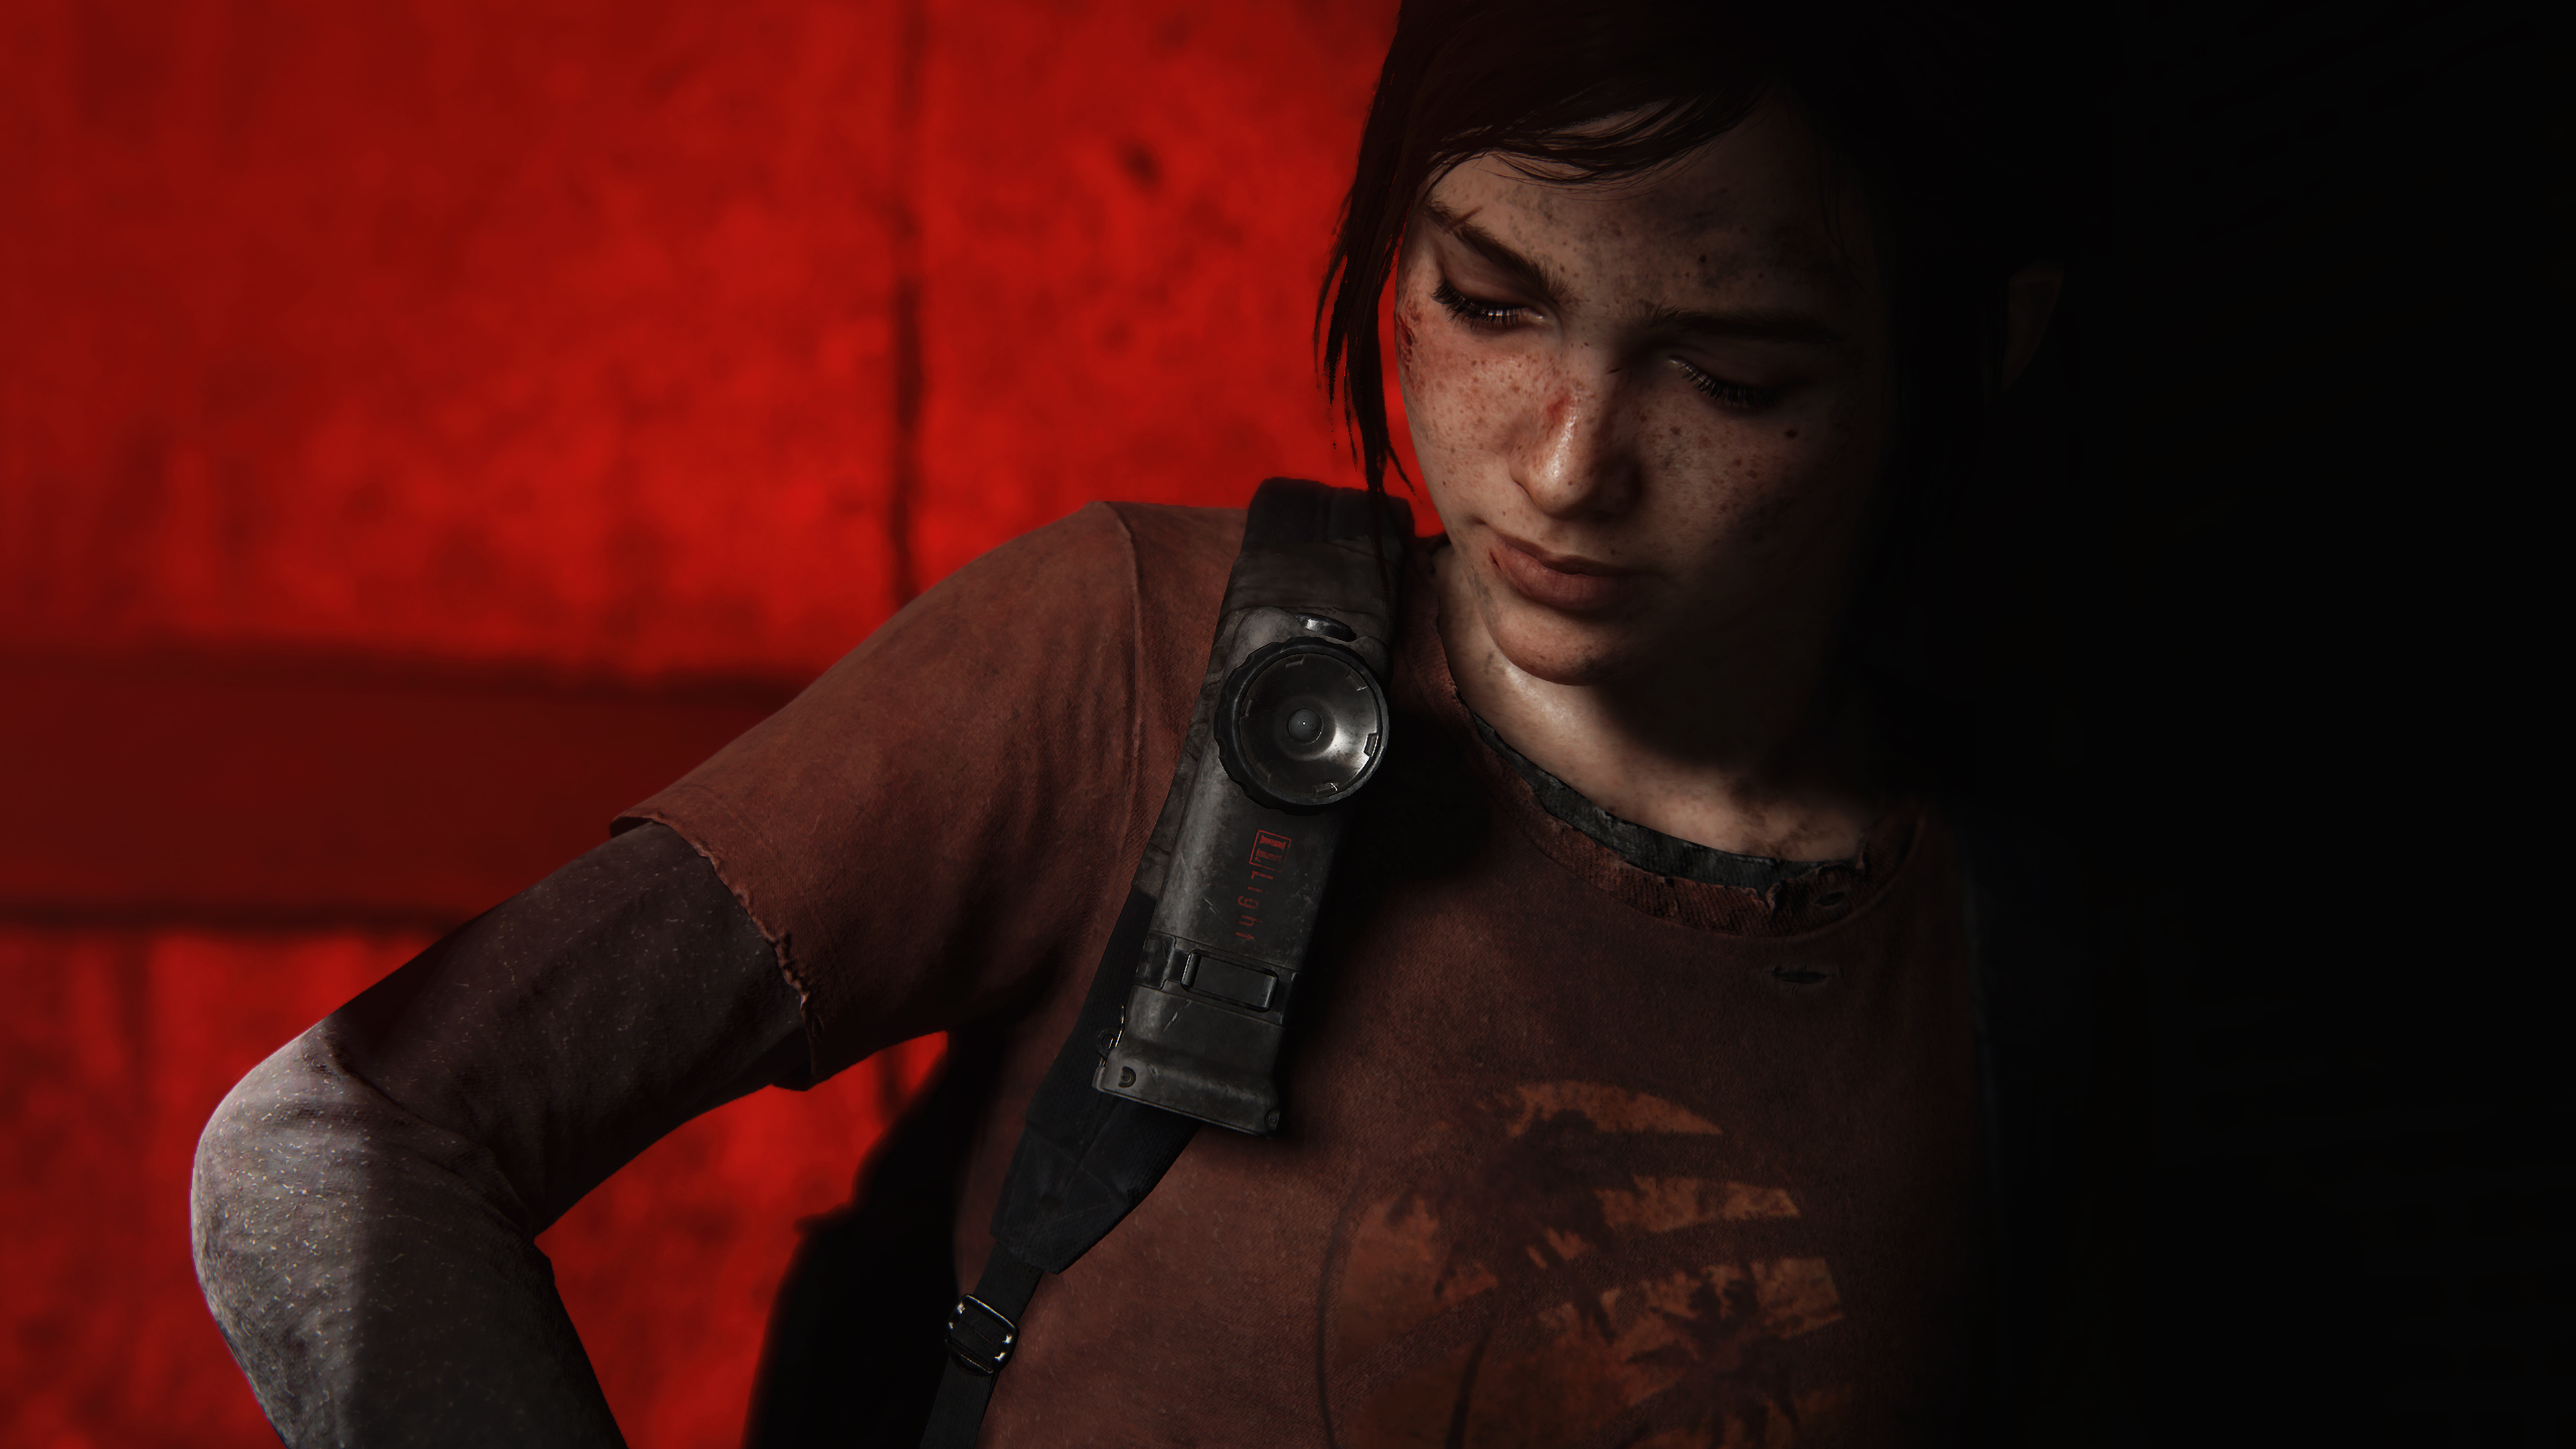 Wallpaper : PlayStation 4, The Last of Us, Ellie 3840x2160